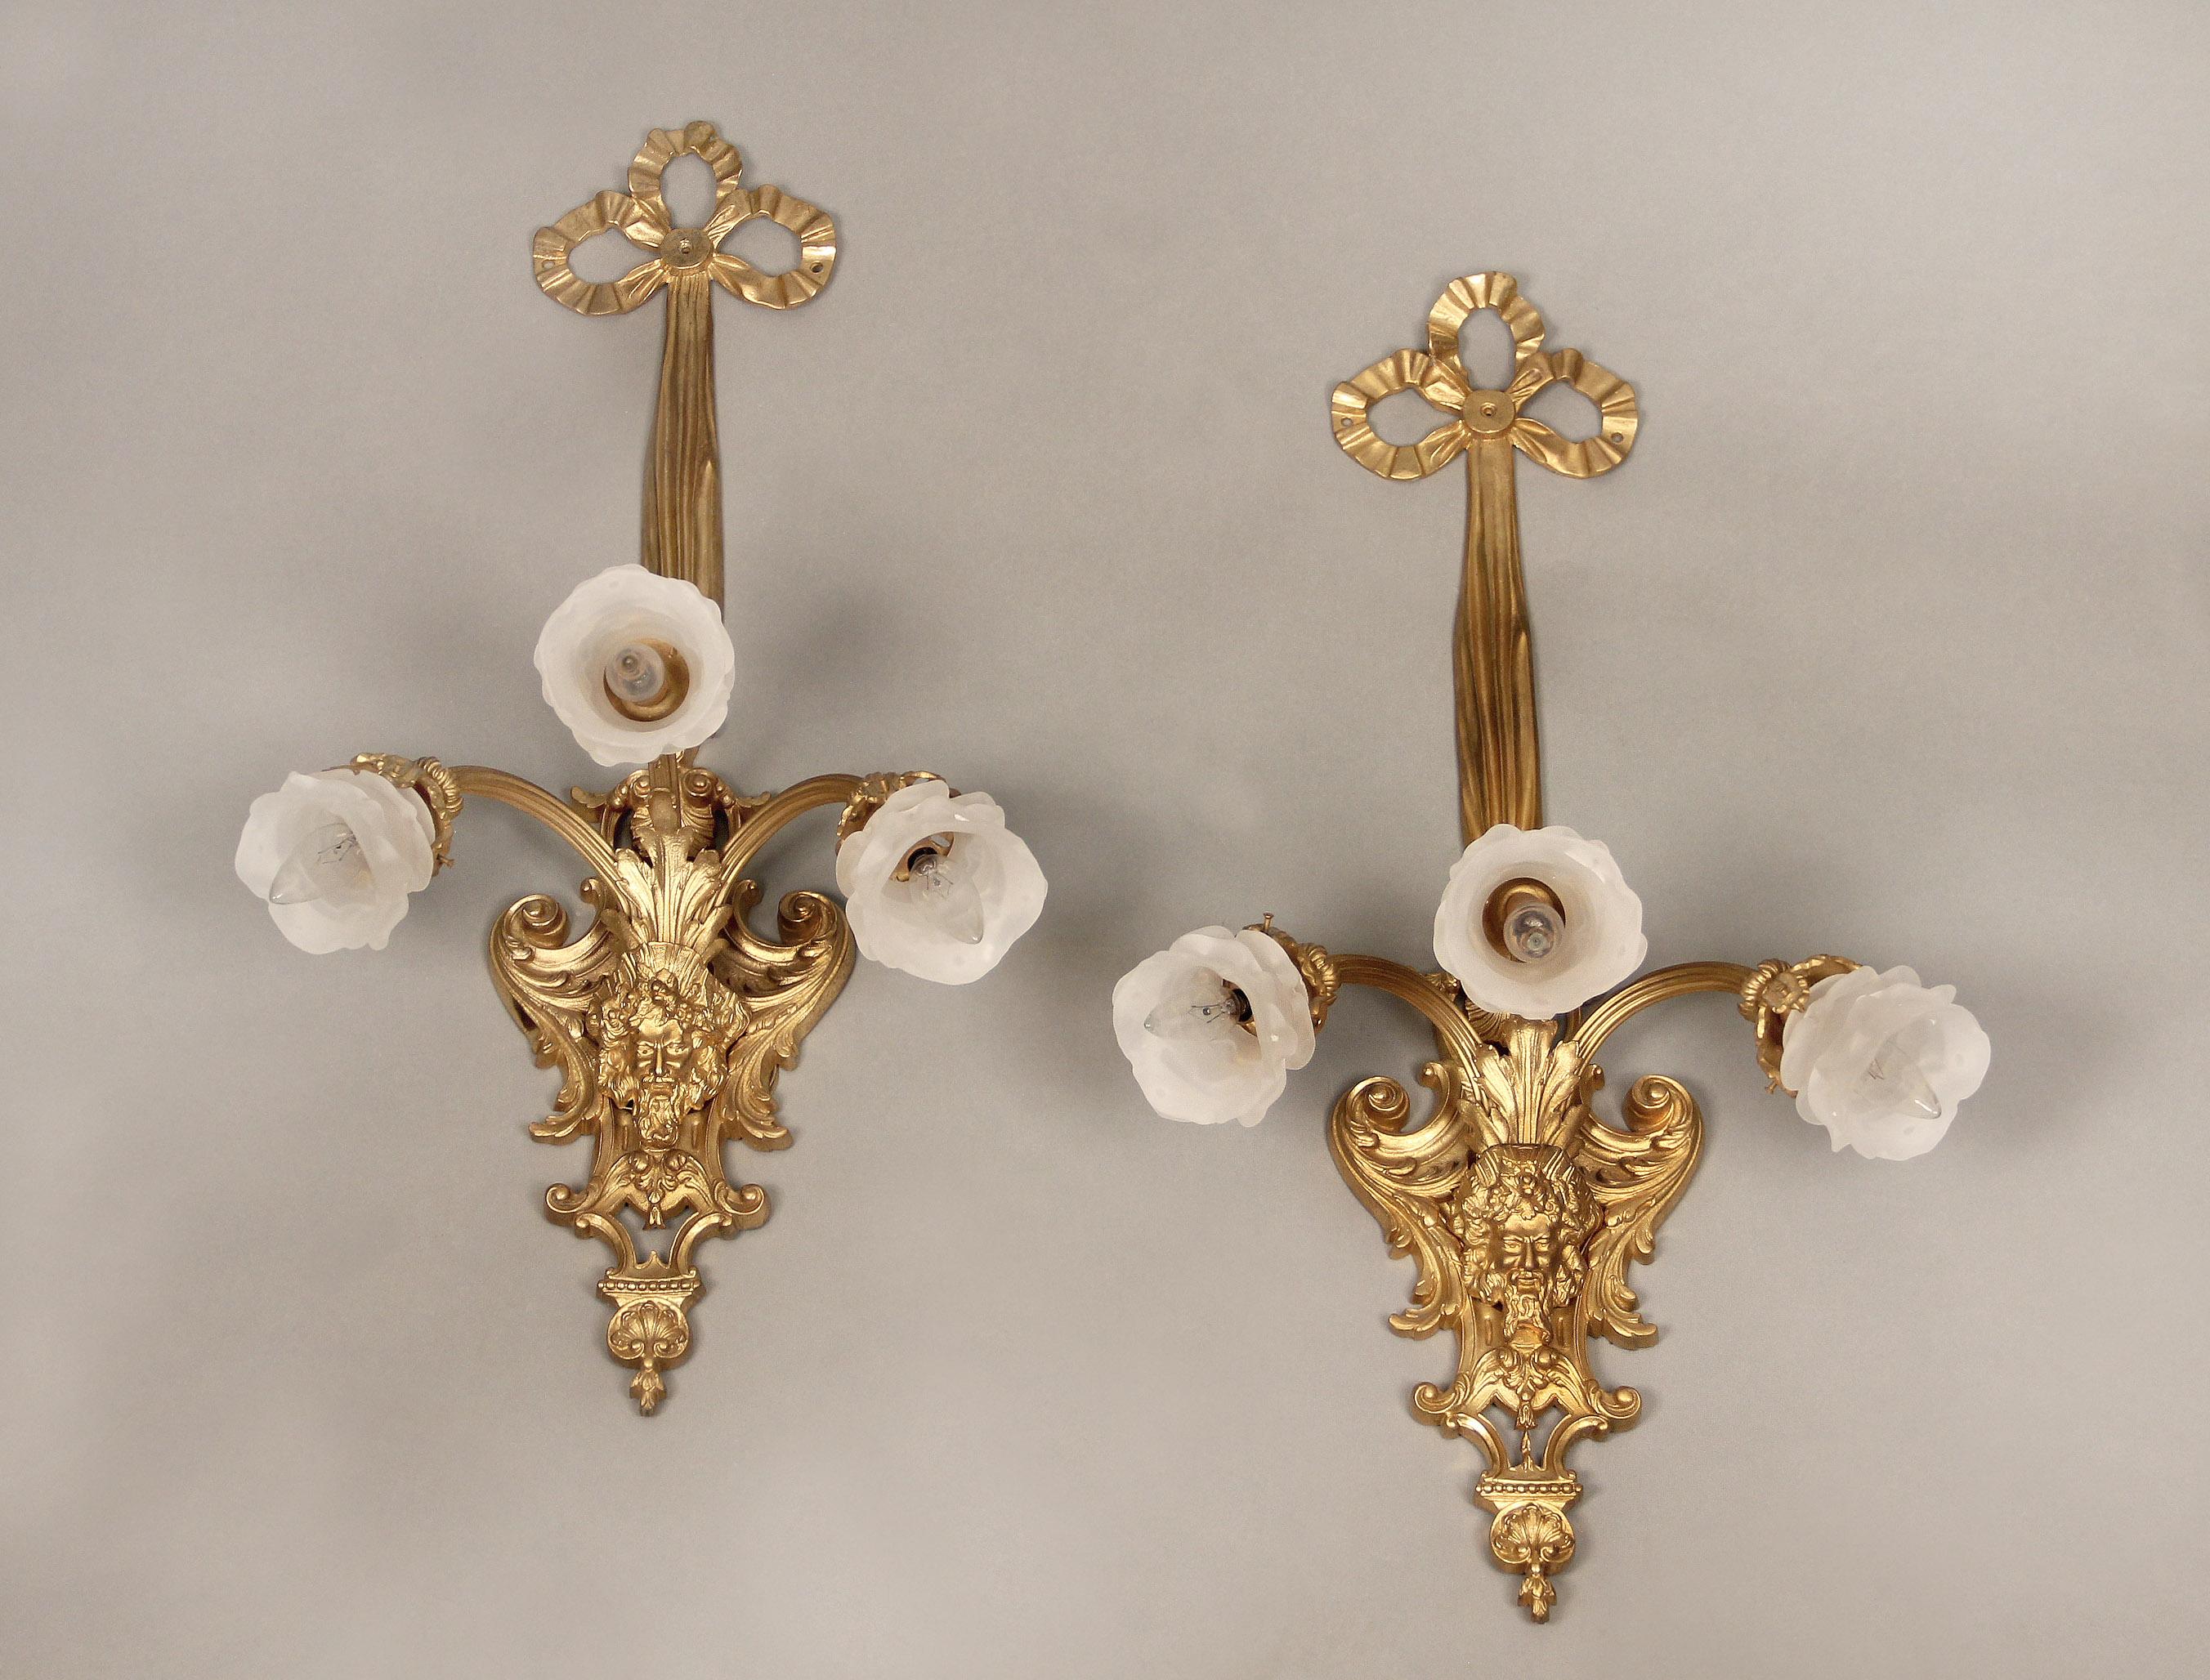 An excellent pair of late 19th century gilt bronze three-light sconces

The center of the backplate depicting a bearded man, the top with a tied ribbon. Three arms with rose shades.